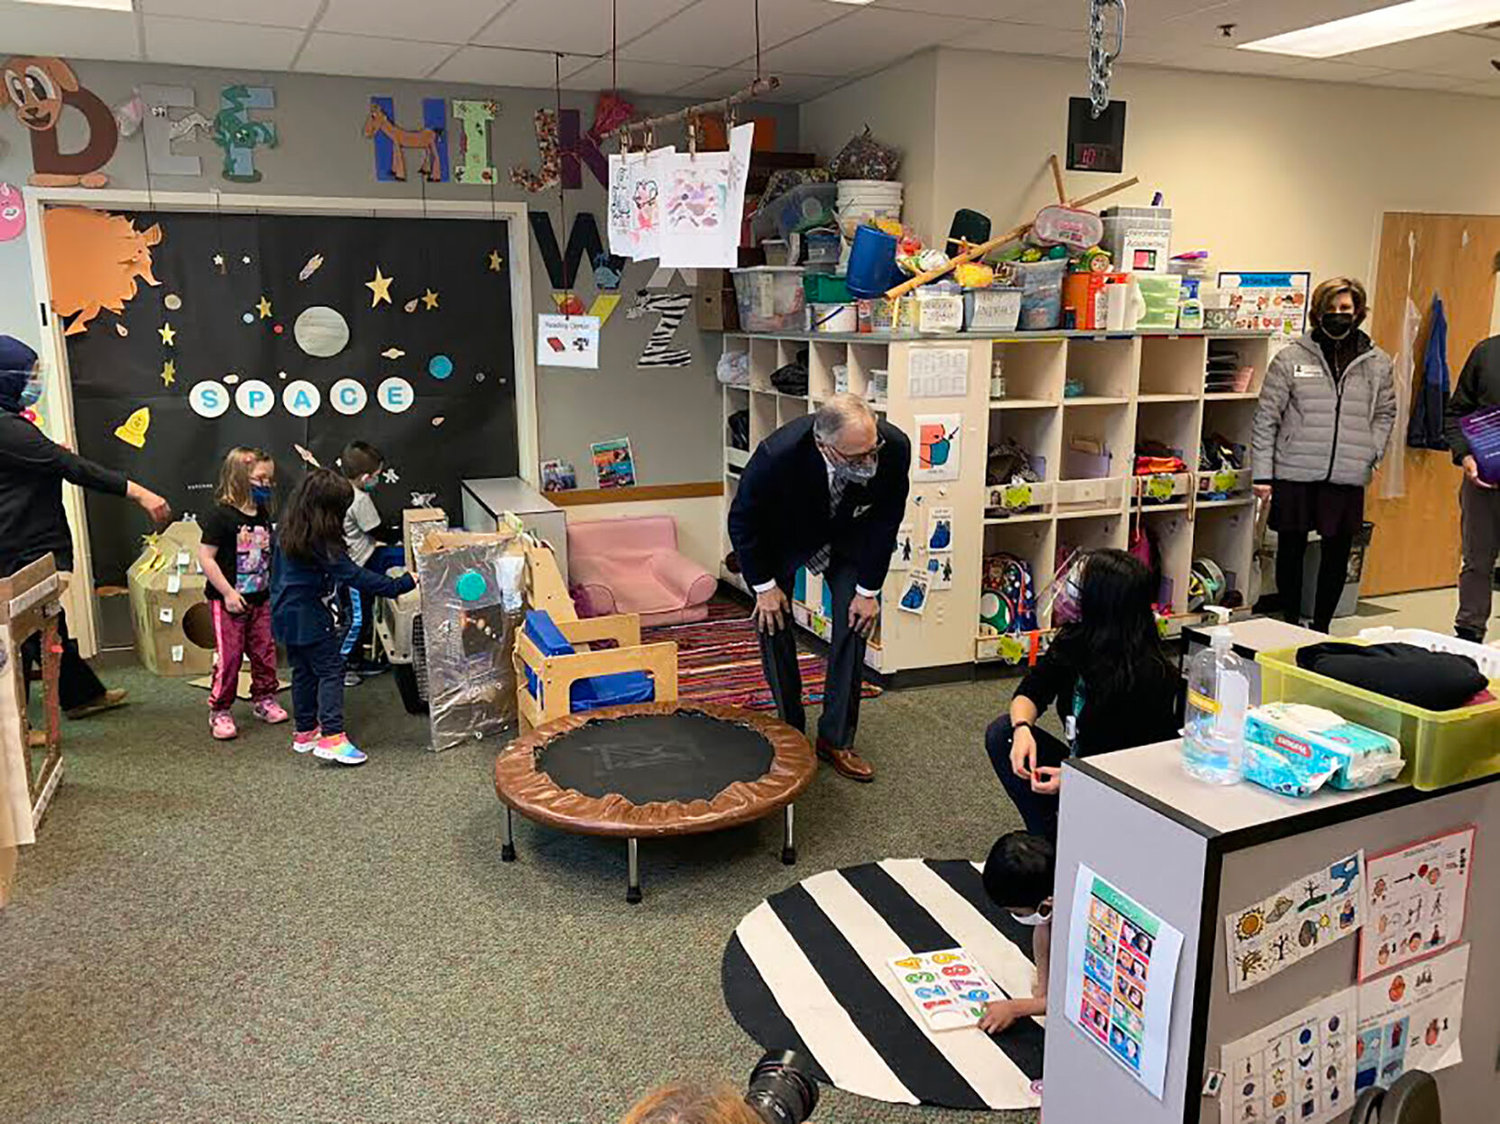 Gov. Jay Inslee visited Phantom Lake Elementary School in Bellevue to evaluate the potential of in-person learning. Photo courtesy of the Governor’s Office.